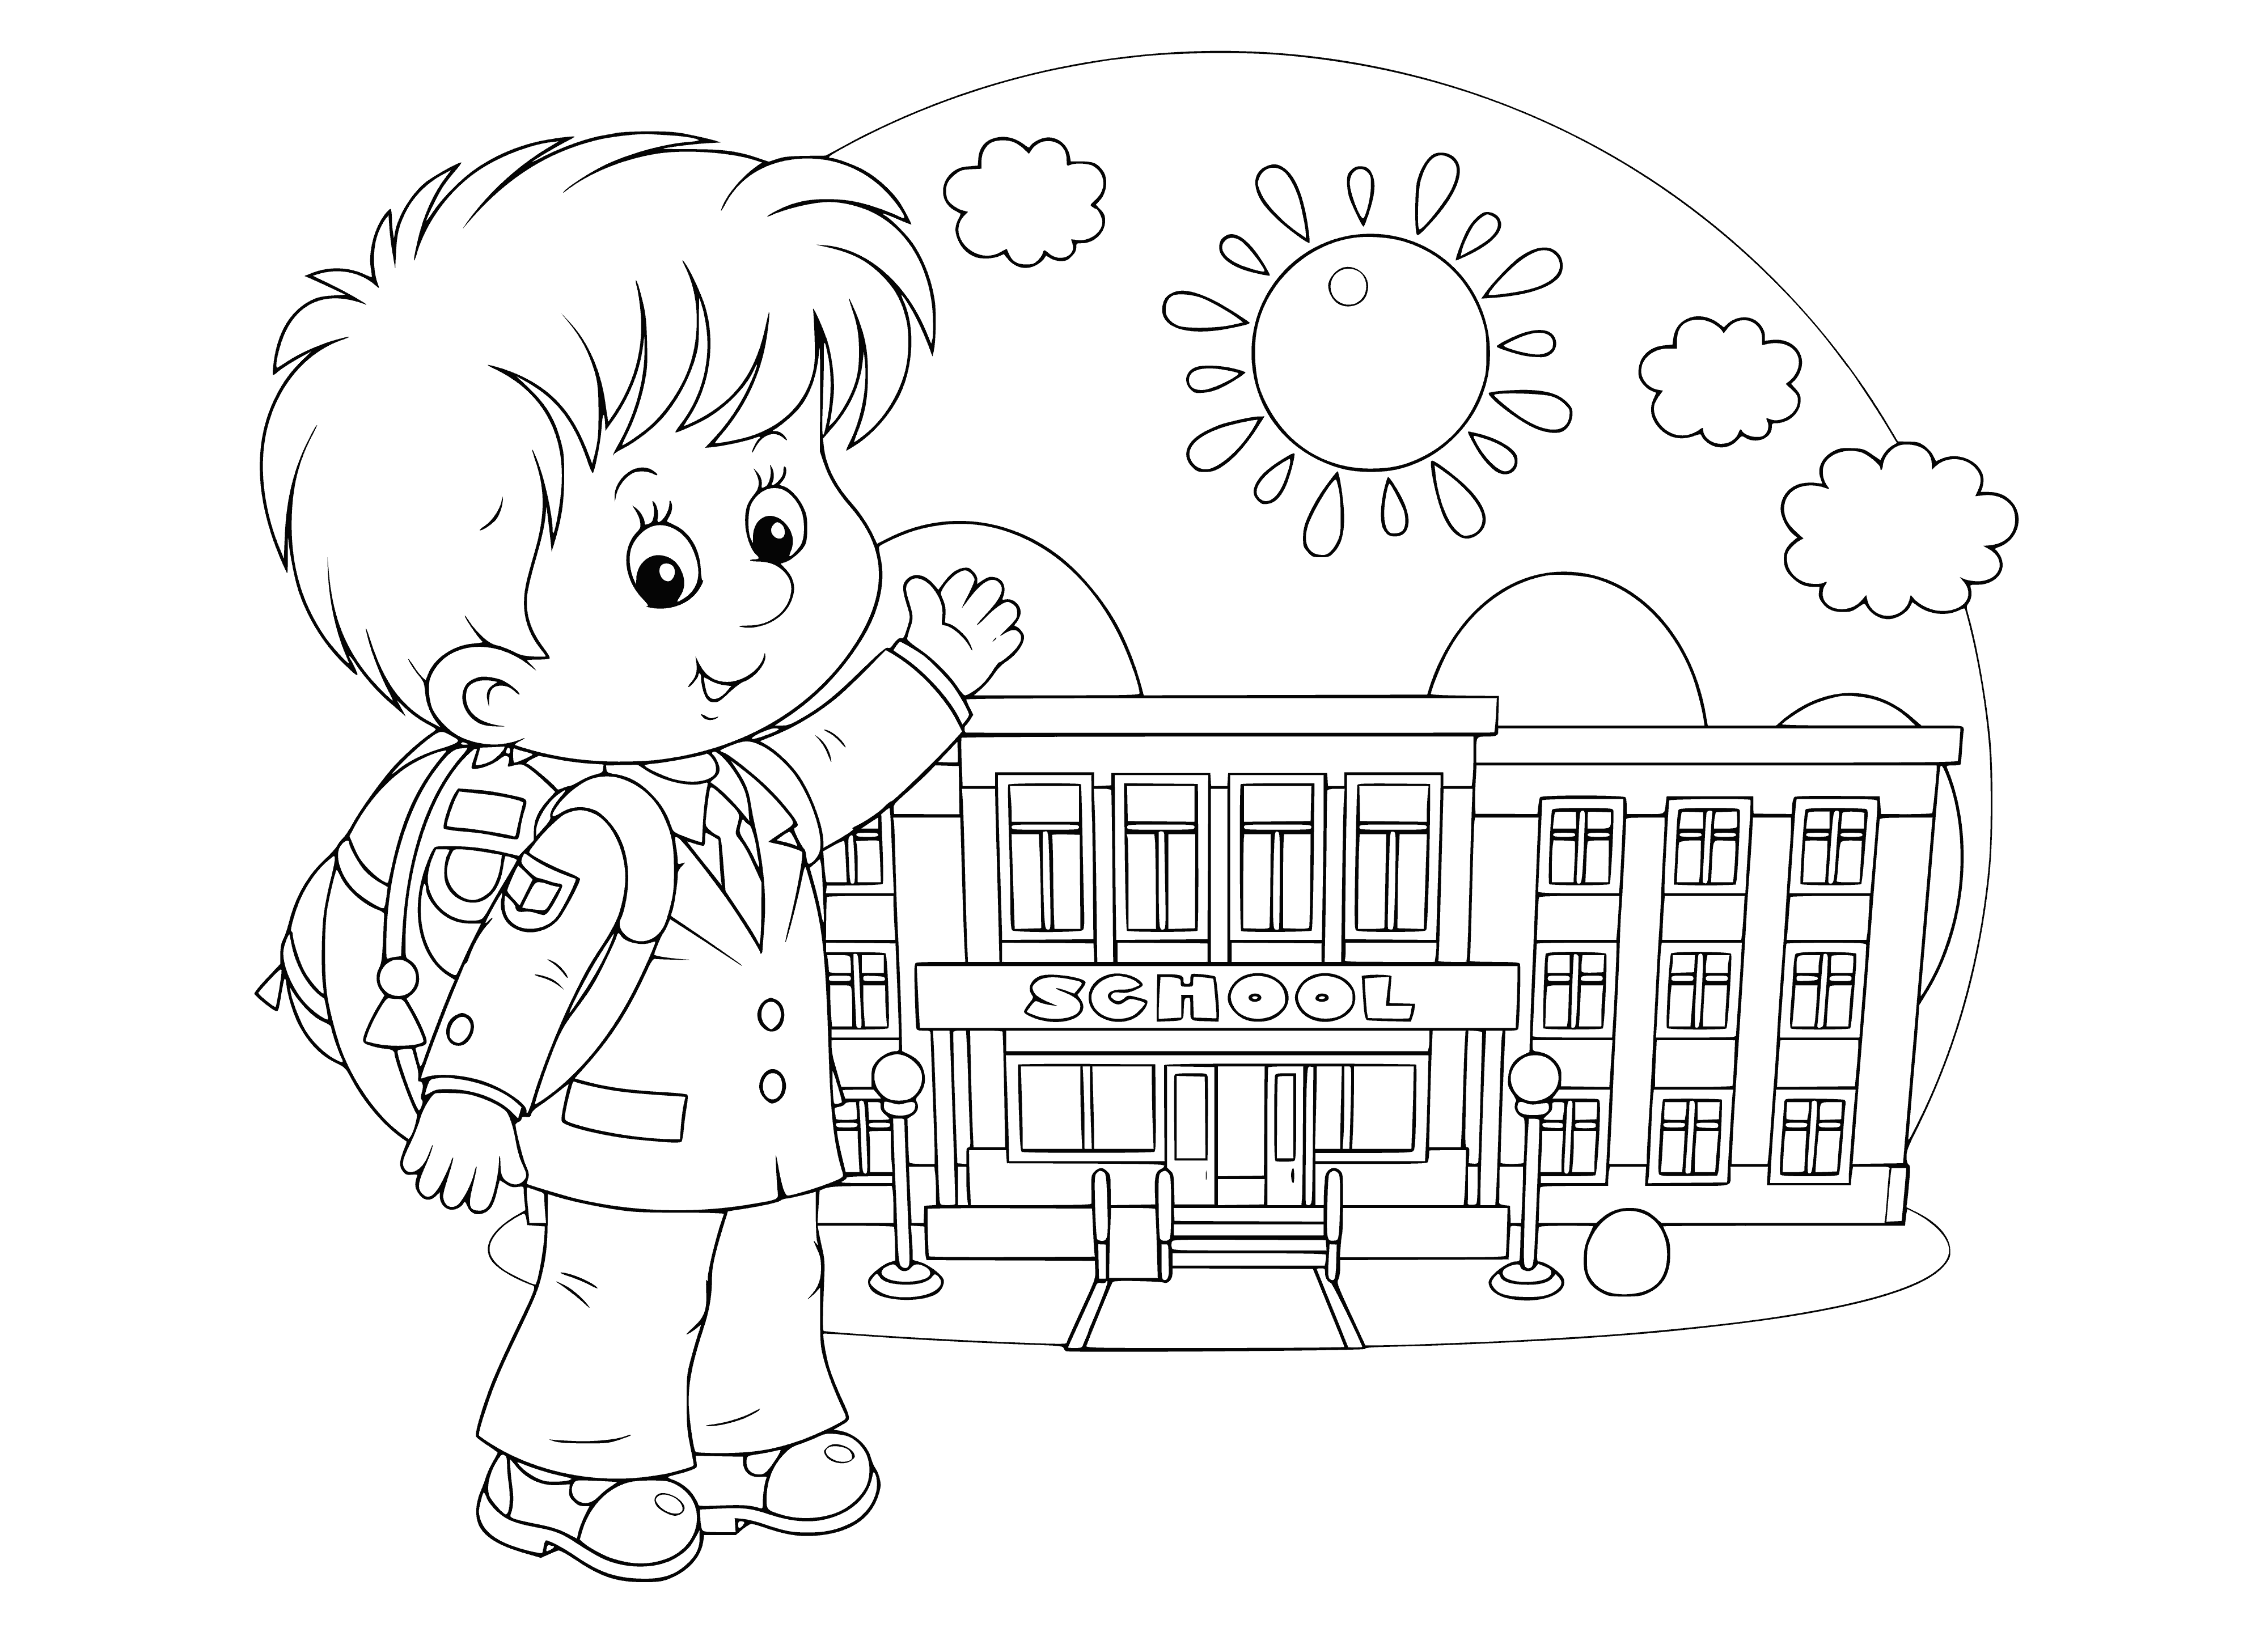 coloring page: Girl starts 1st grade on 1st Sept, excitedly holding a pencil with "1 September is the day of knowledge" written on the chalkboard behind her.